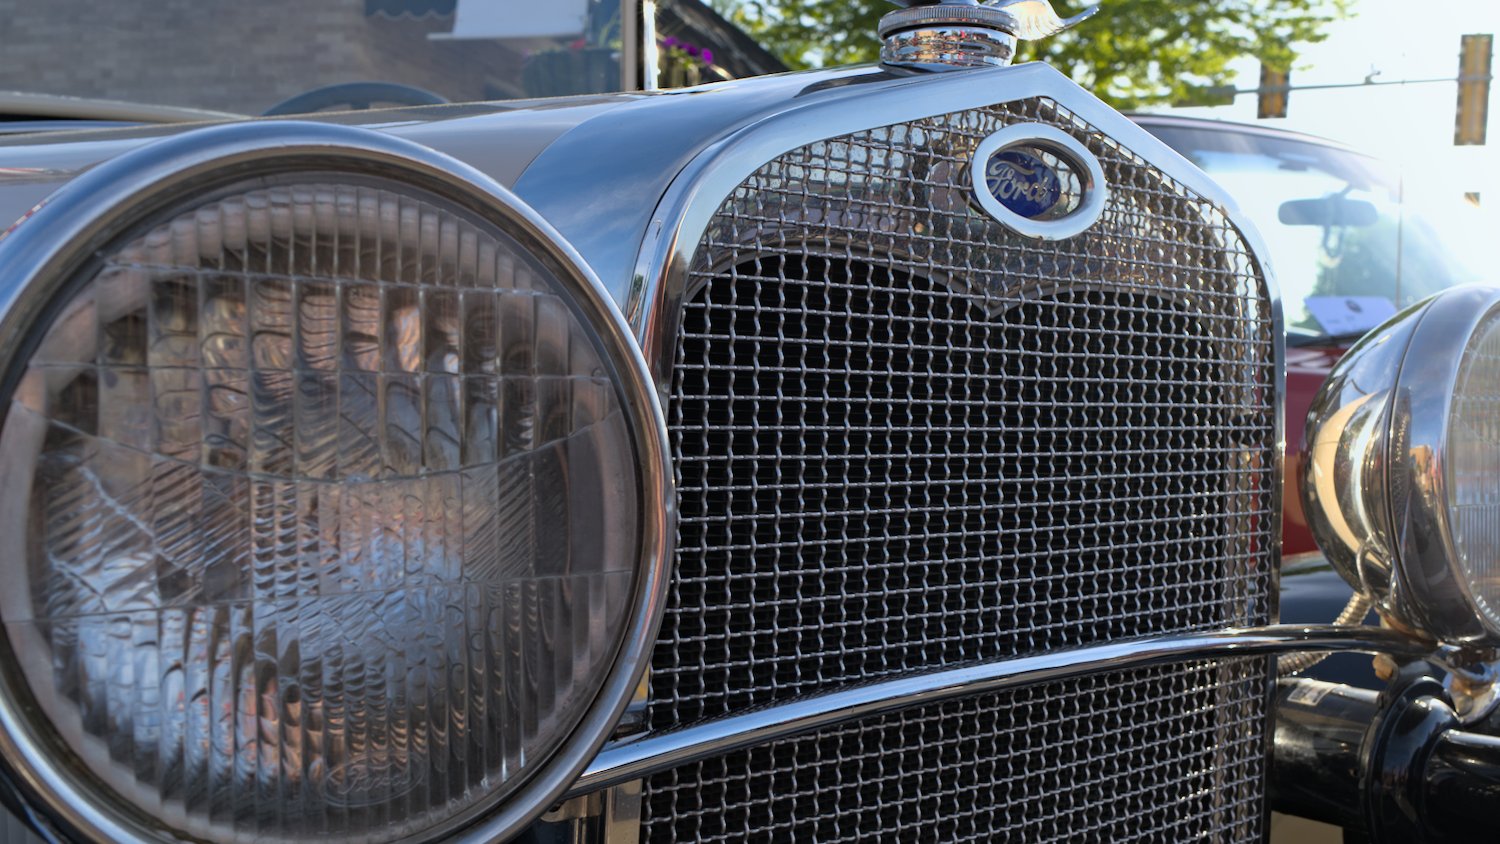 Gorgeous wire grille of the Ford Model A.